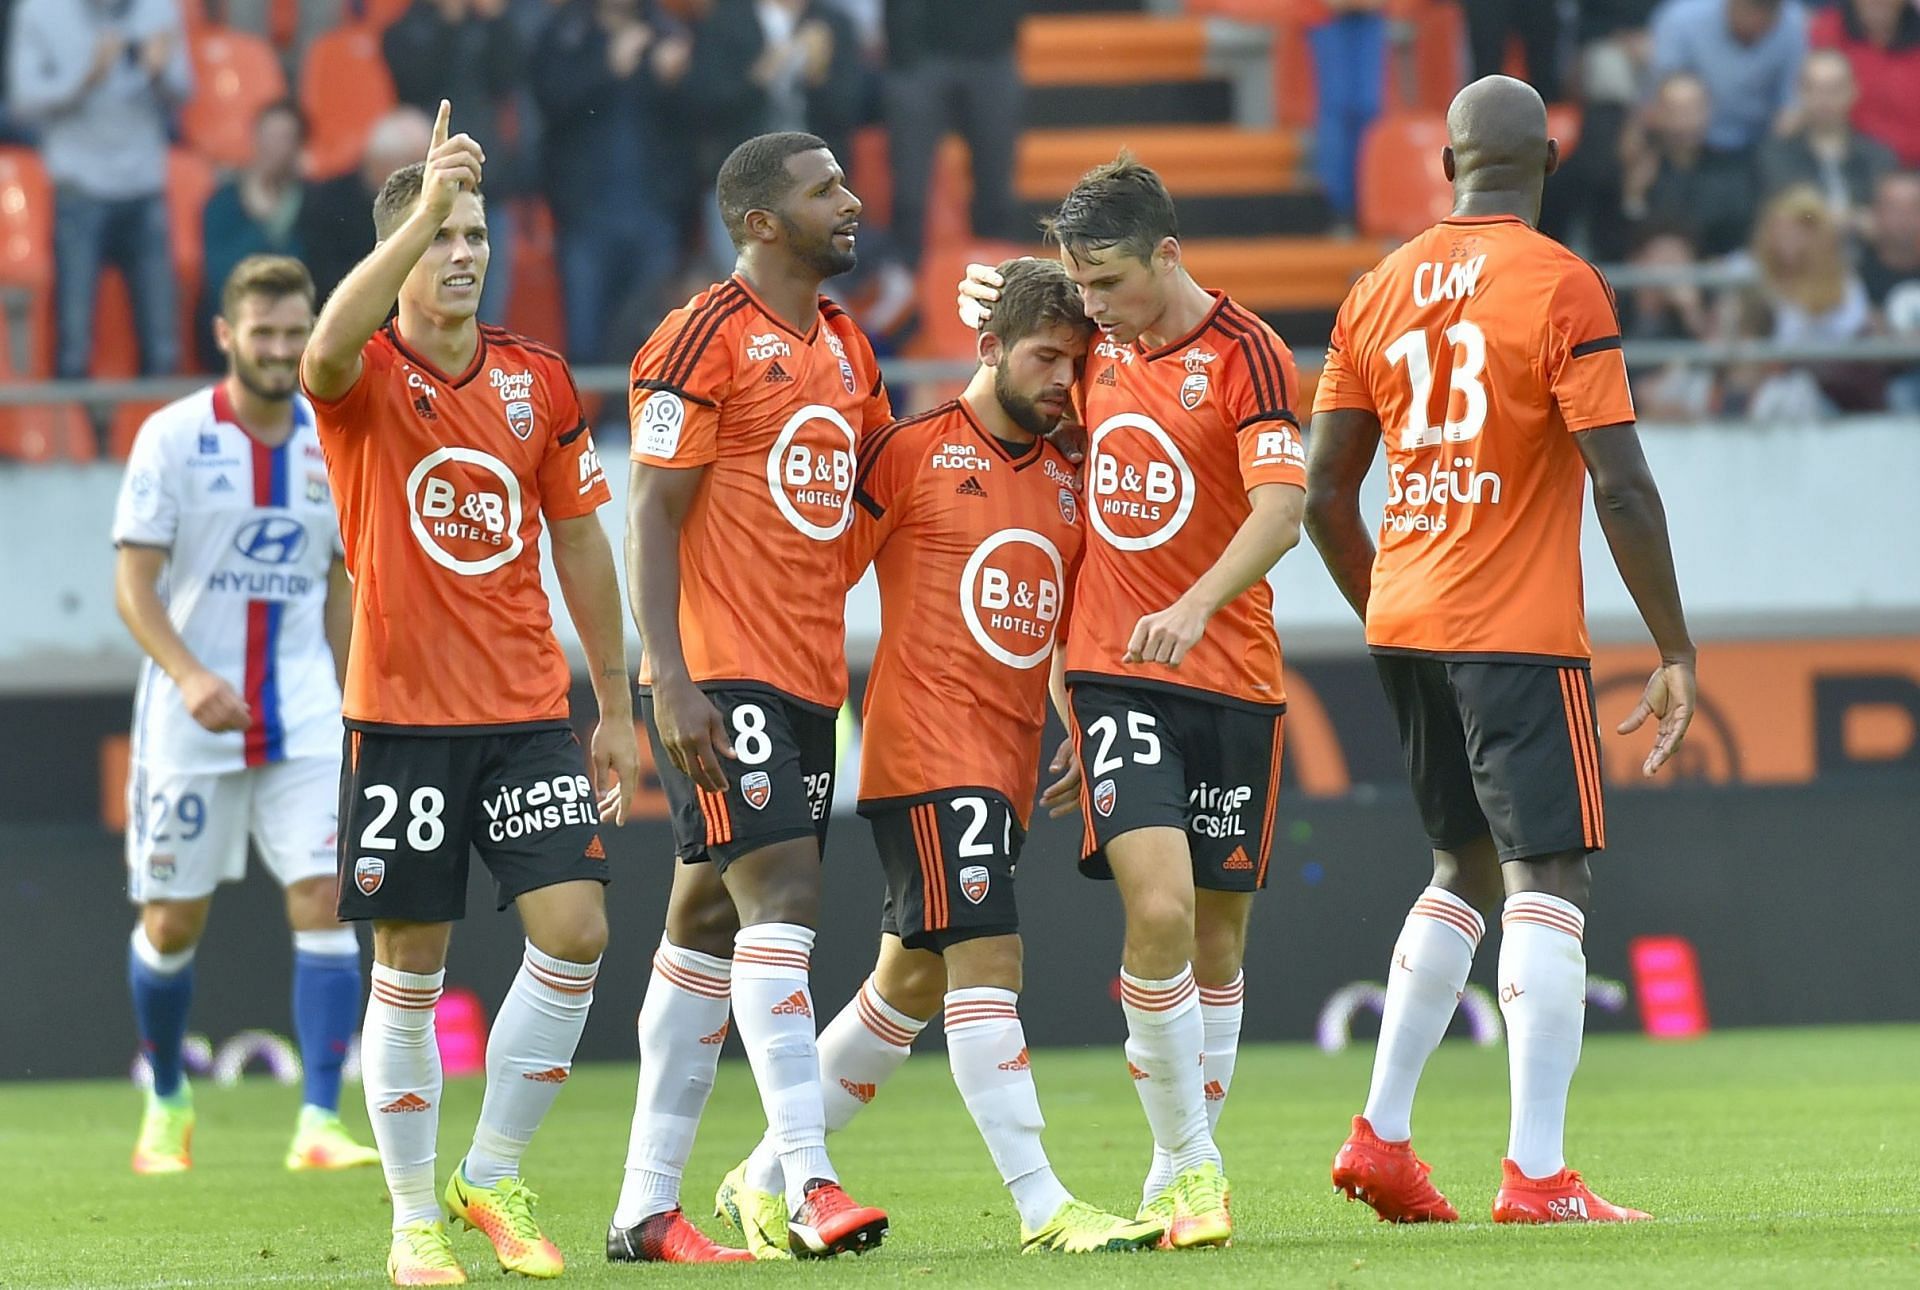 Lorient will be looking to win the game on Saturday